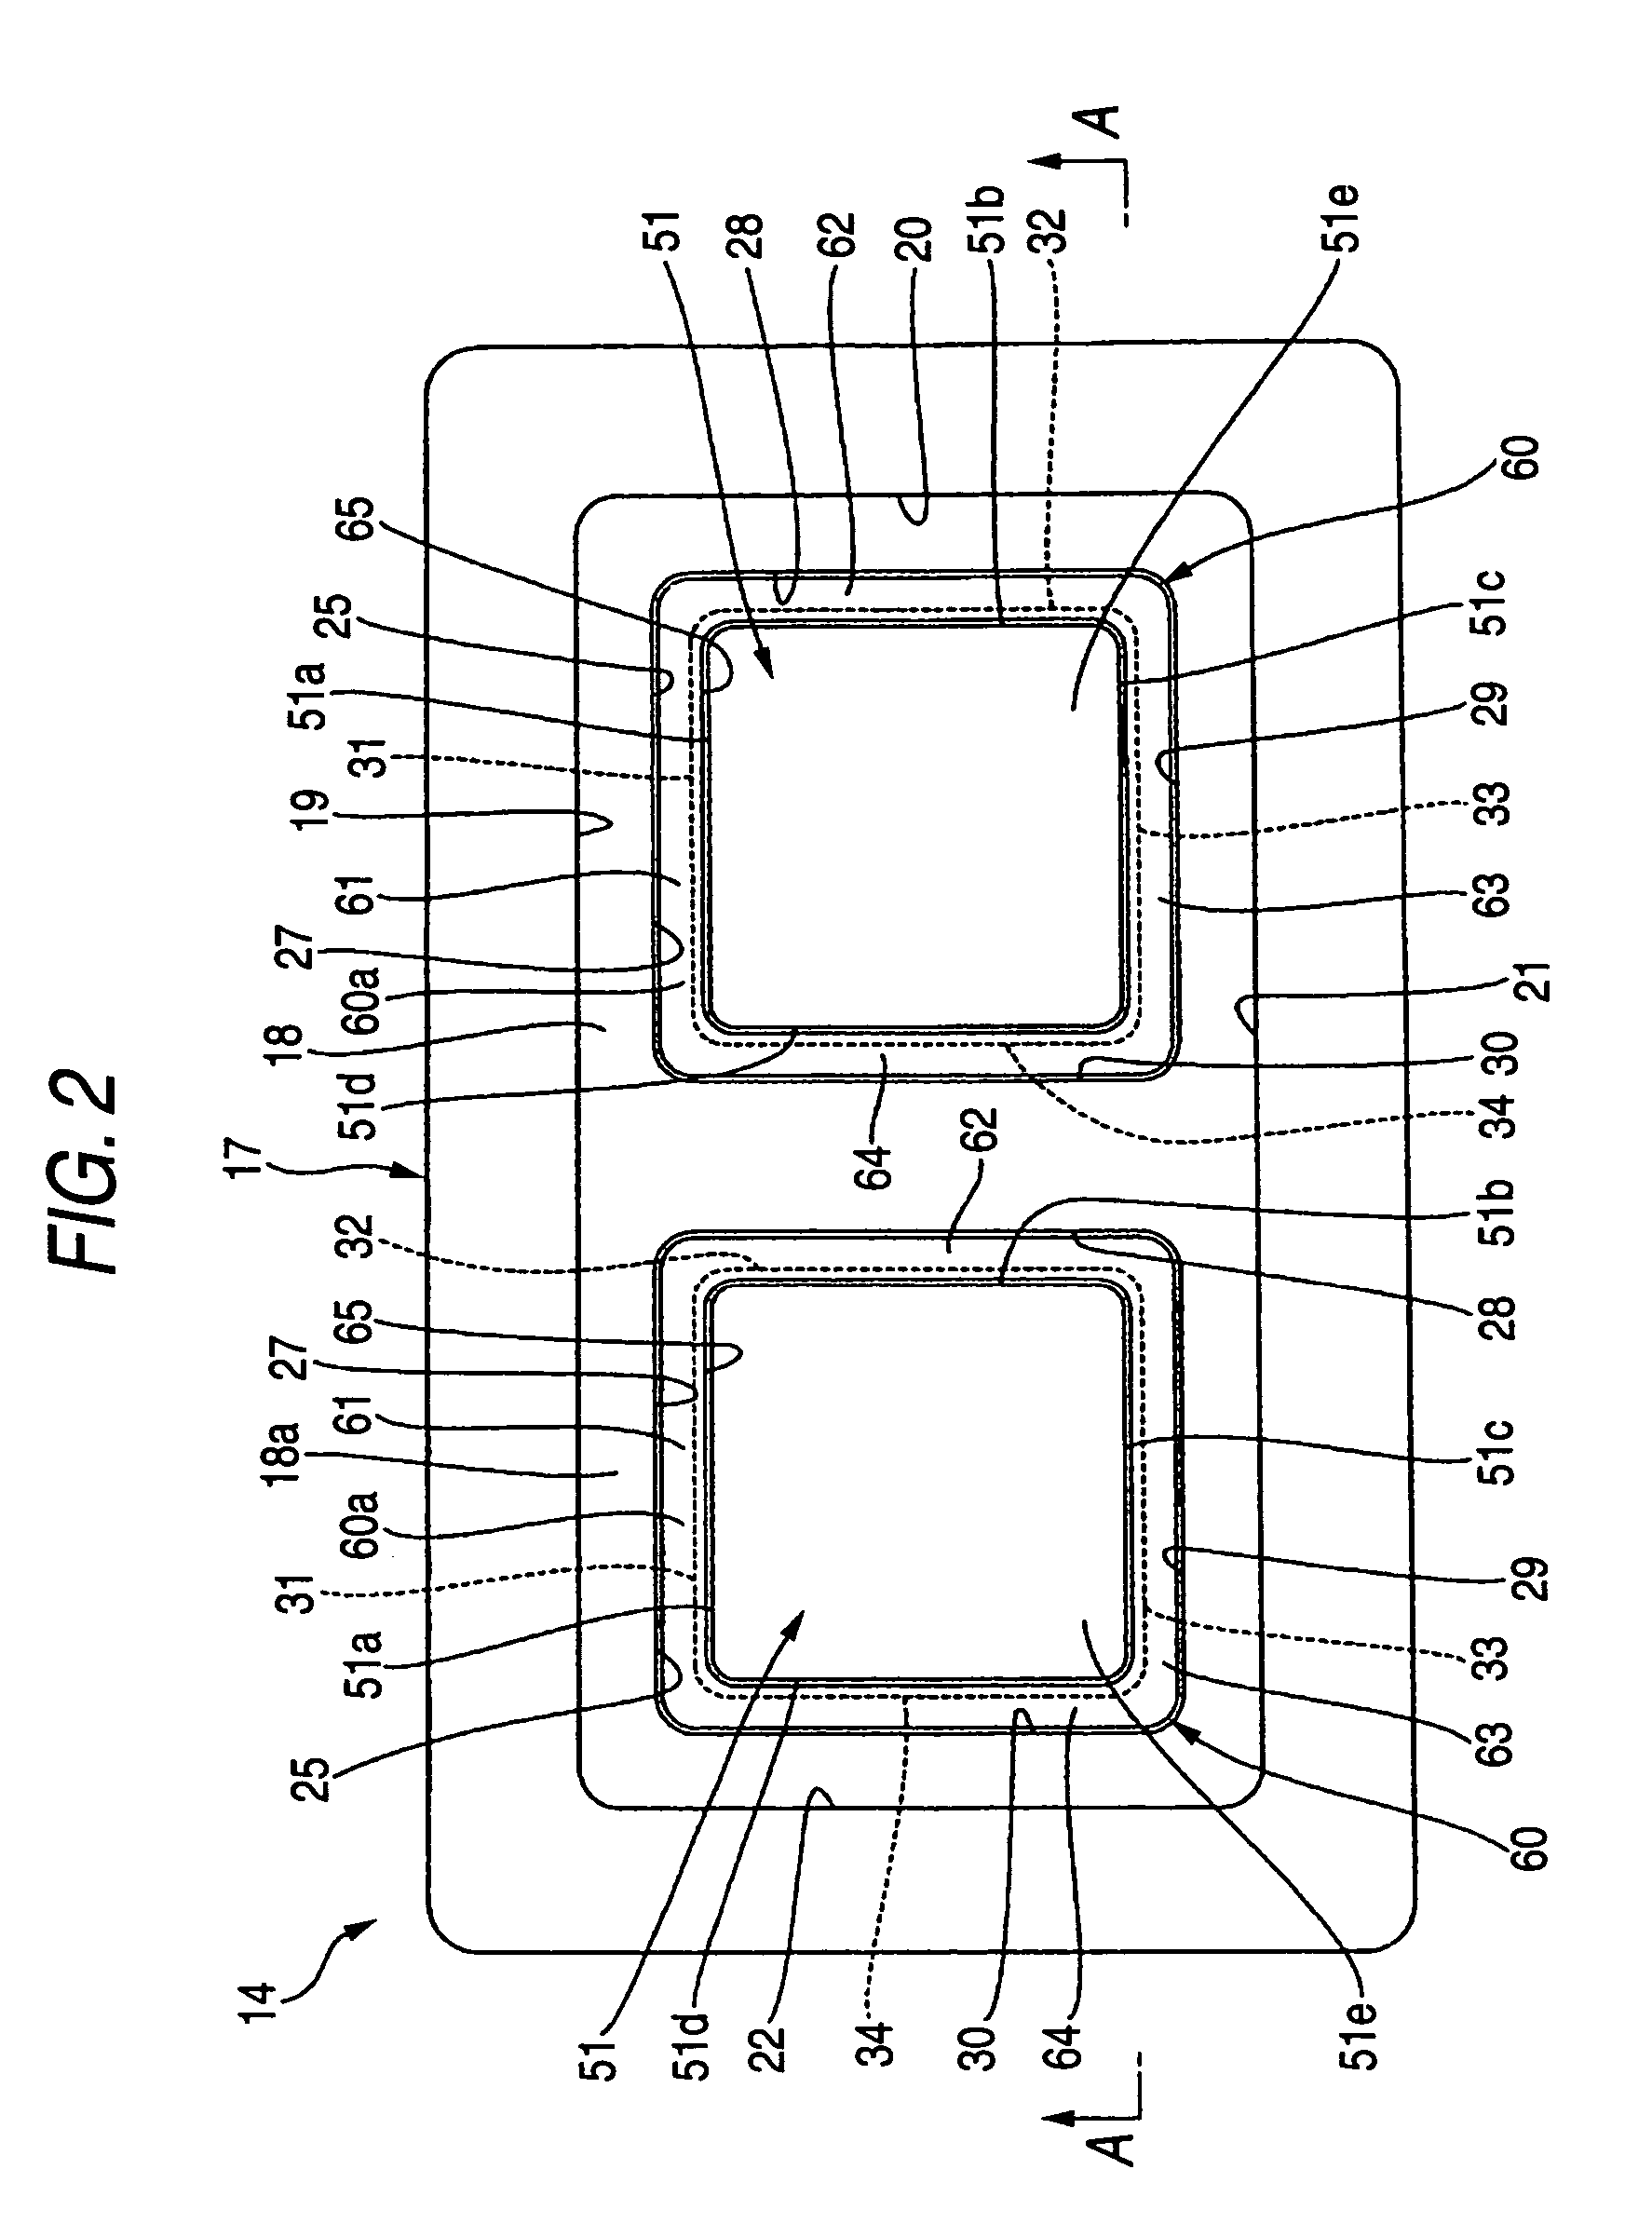 Automotive container holding apparatus